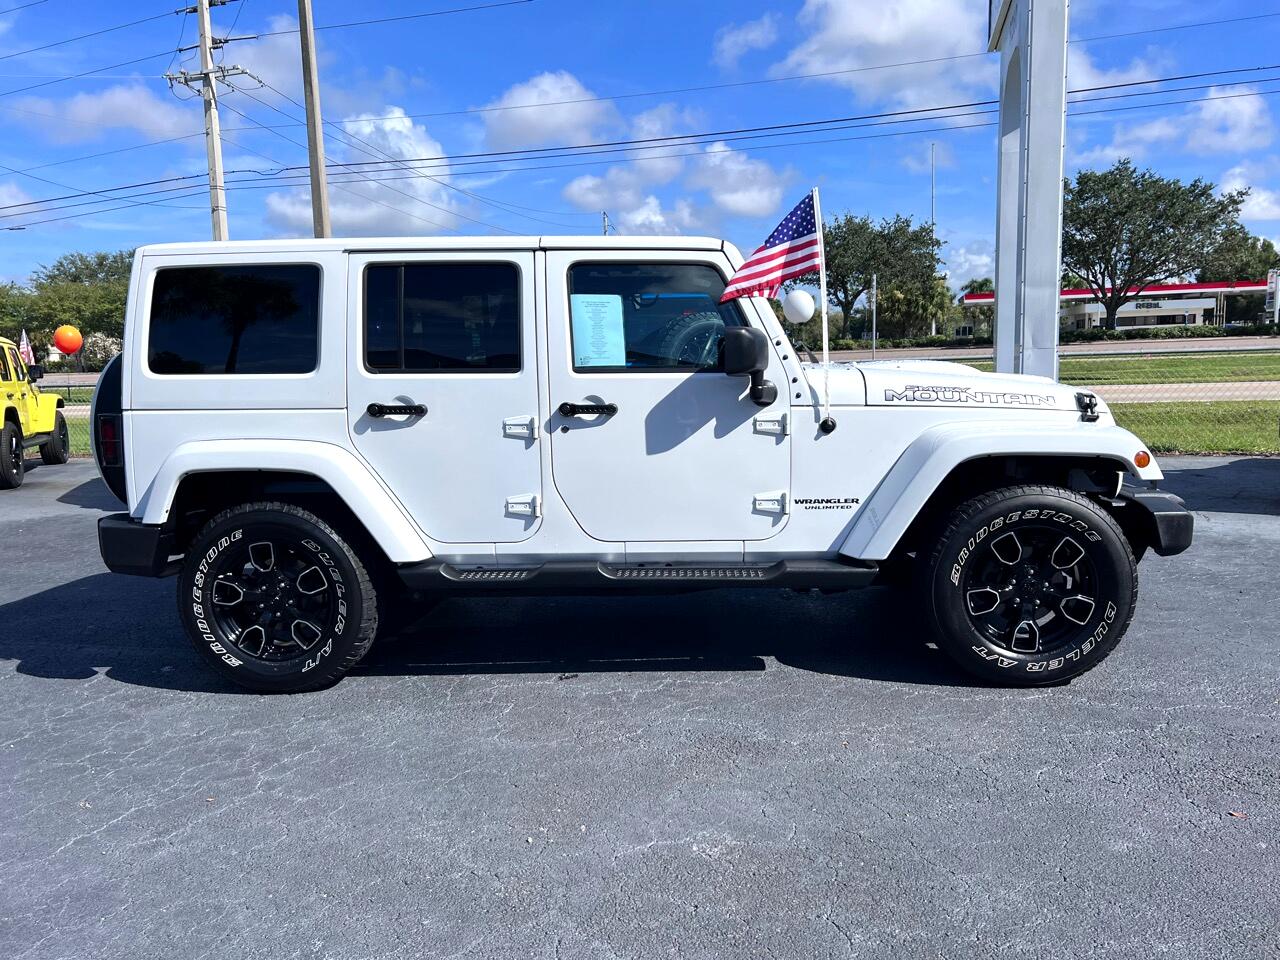 Used 2017 Jeep Wrangler Unlimited Sahara Smoky Mountain Edition 4x4 for  Sale in Fort Myers FL 33912 Beach Buggys